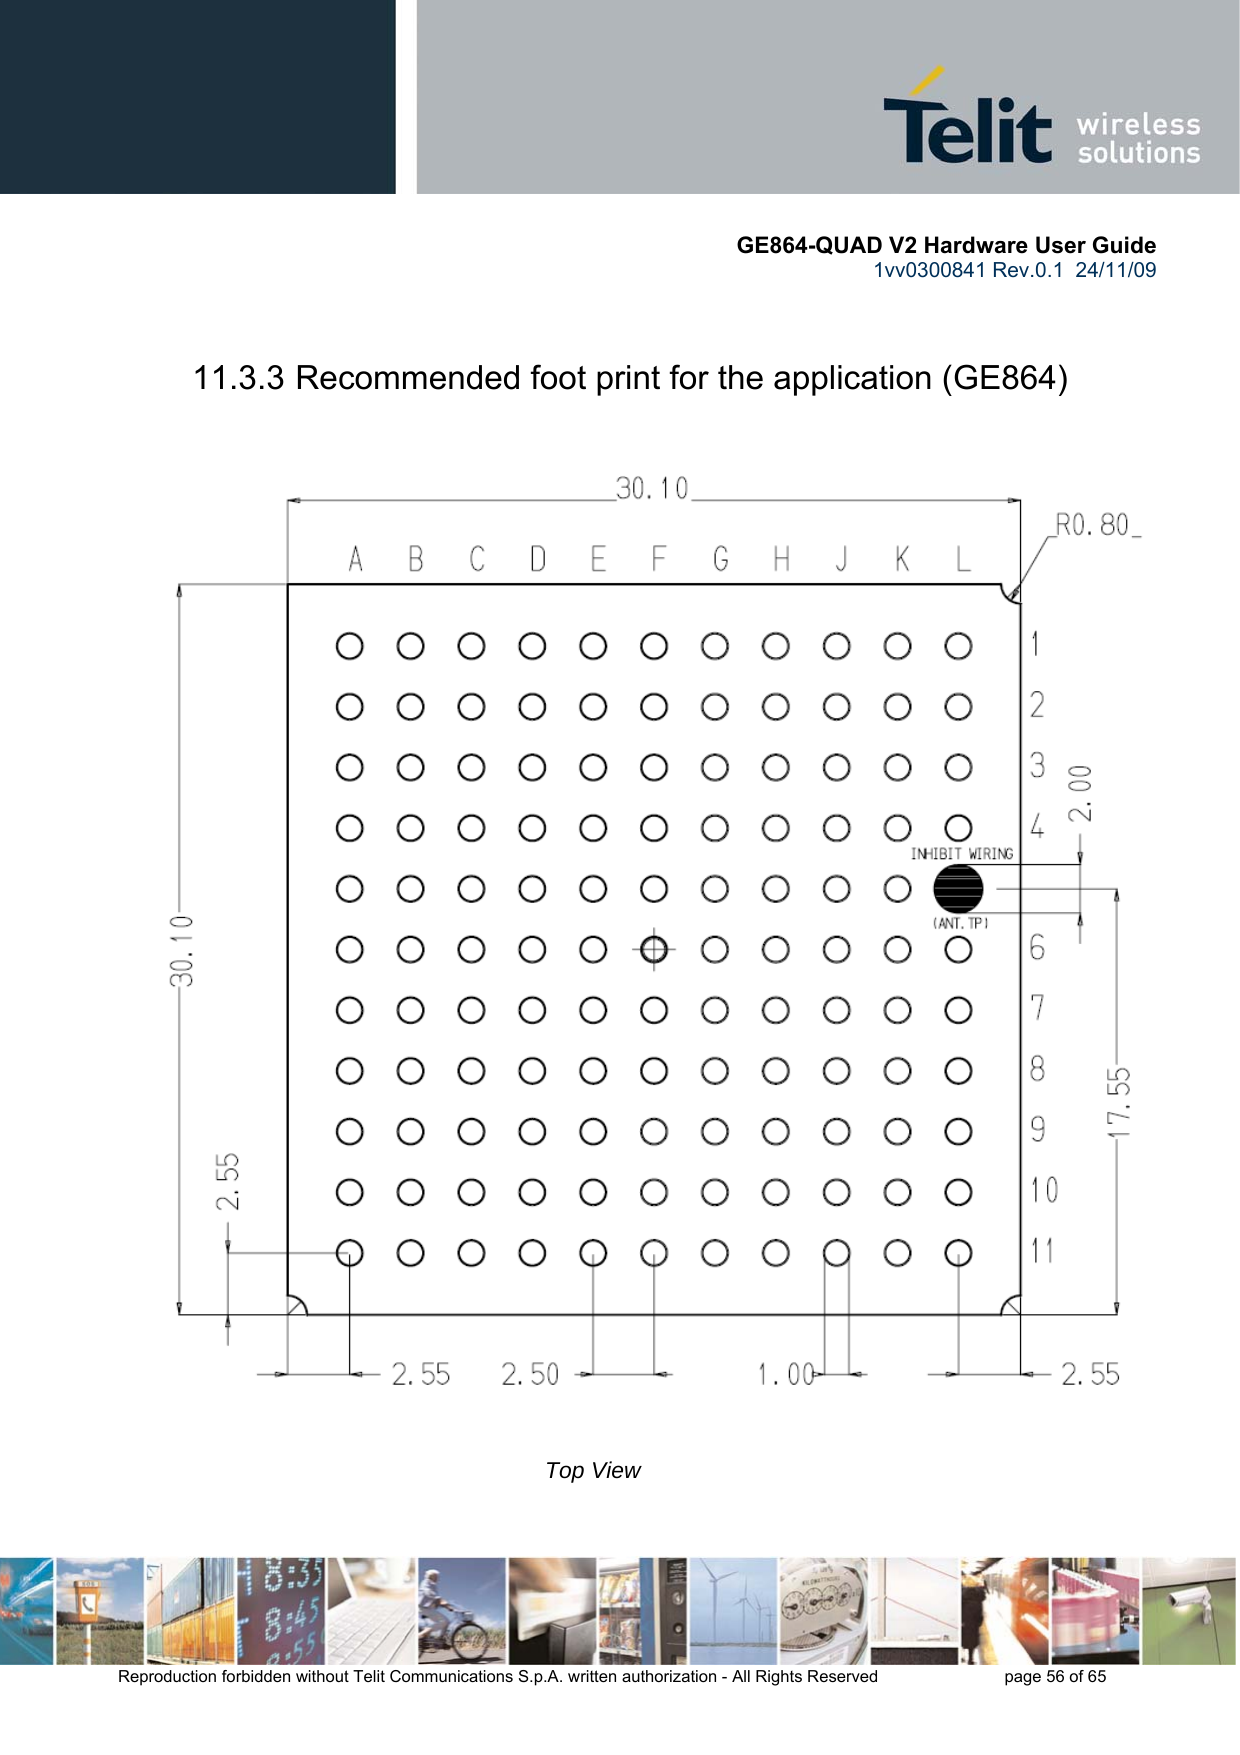       GE864-QUAD V2 Hardware User Guide 1vv0300841 Rev.0.1  24/11/09      Reproduction forbidden without Telit Communications S.p.A. written authorization - All Rights Reserved    page 56 of 65   11.3.3 Recommended foot print for the application (GE864)                                                                                                                          Top View                                                                                                                   